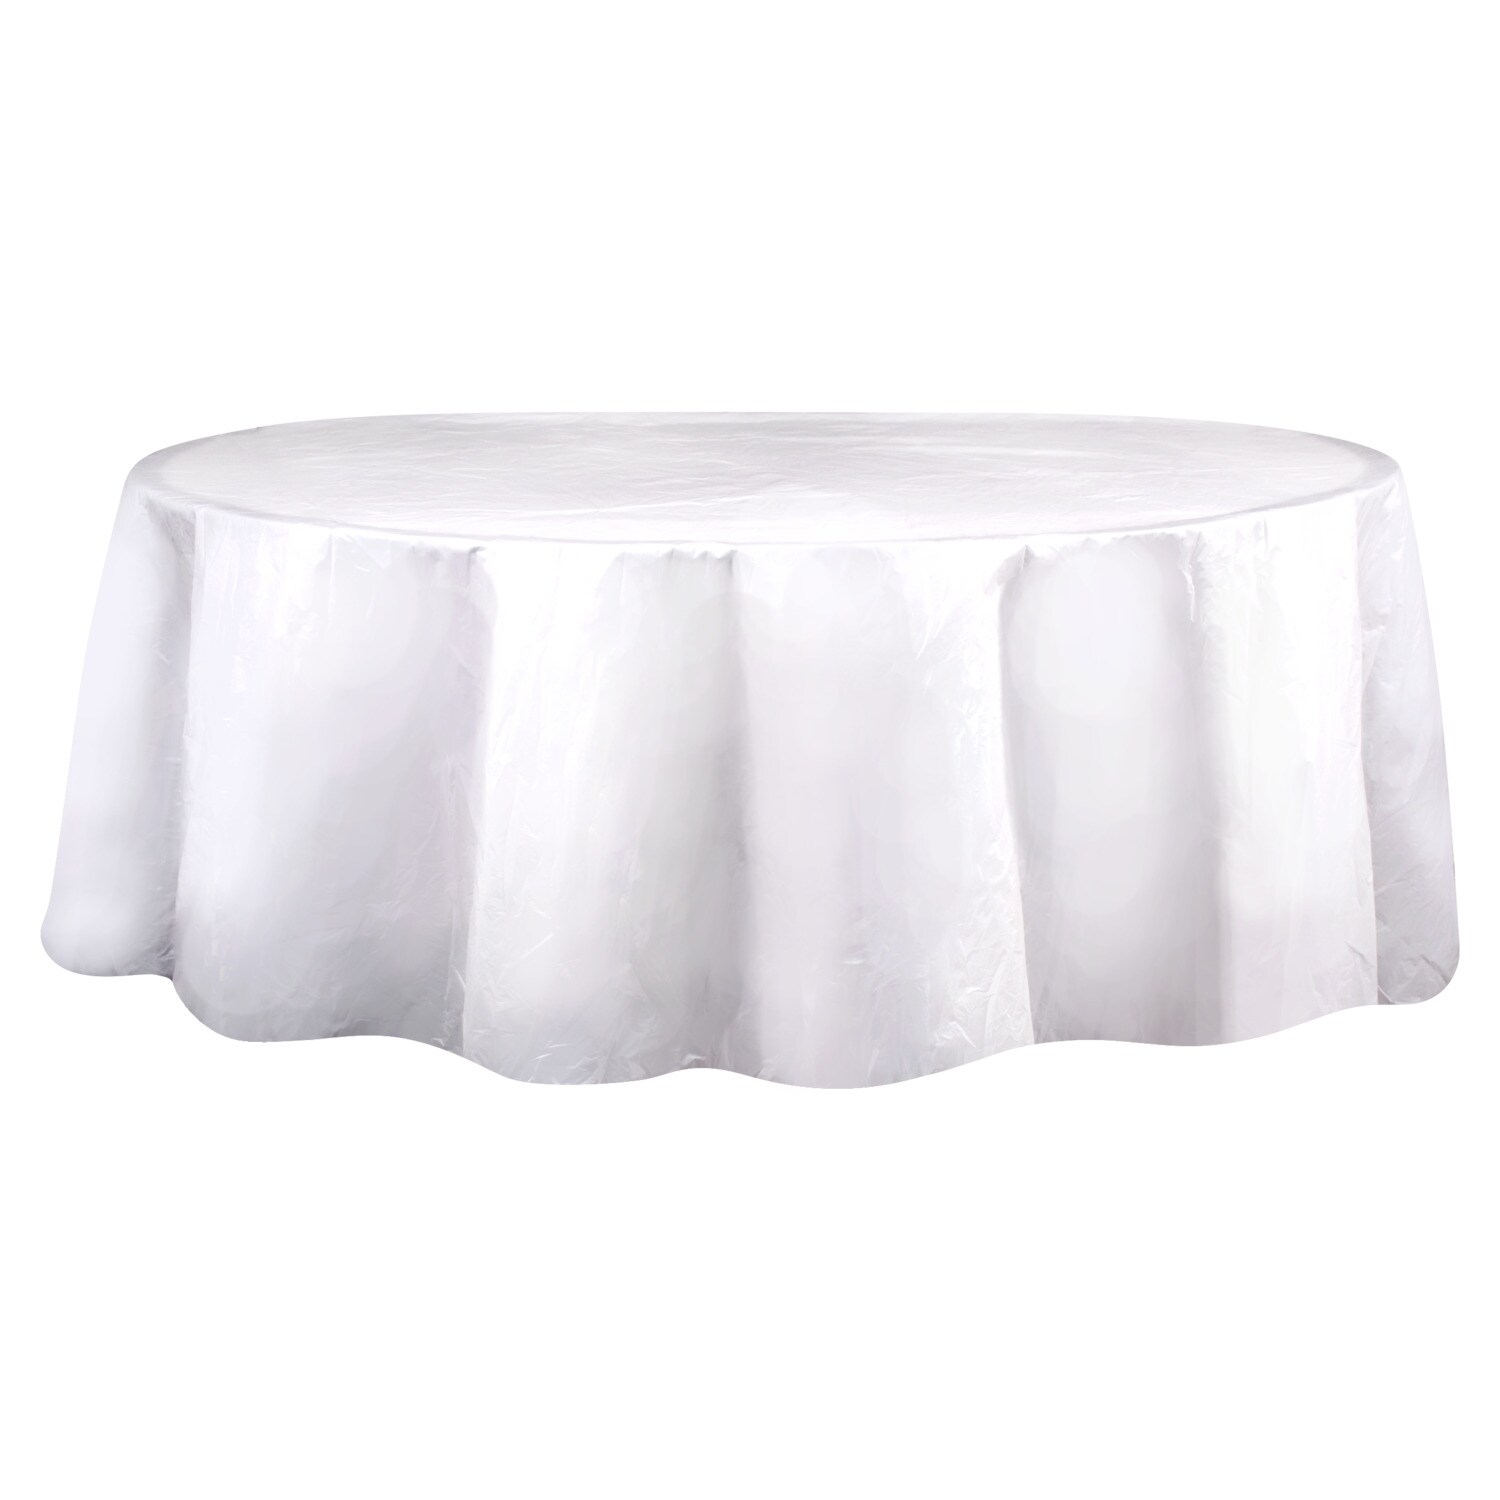 12Pk Round 84 IN Disposable Party Table Cover Lot45 White Plastic Tablecloths